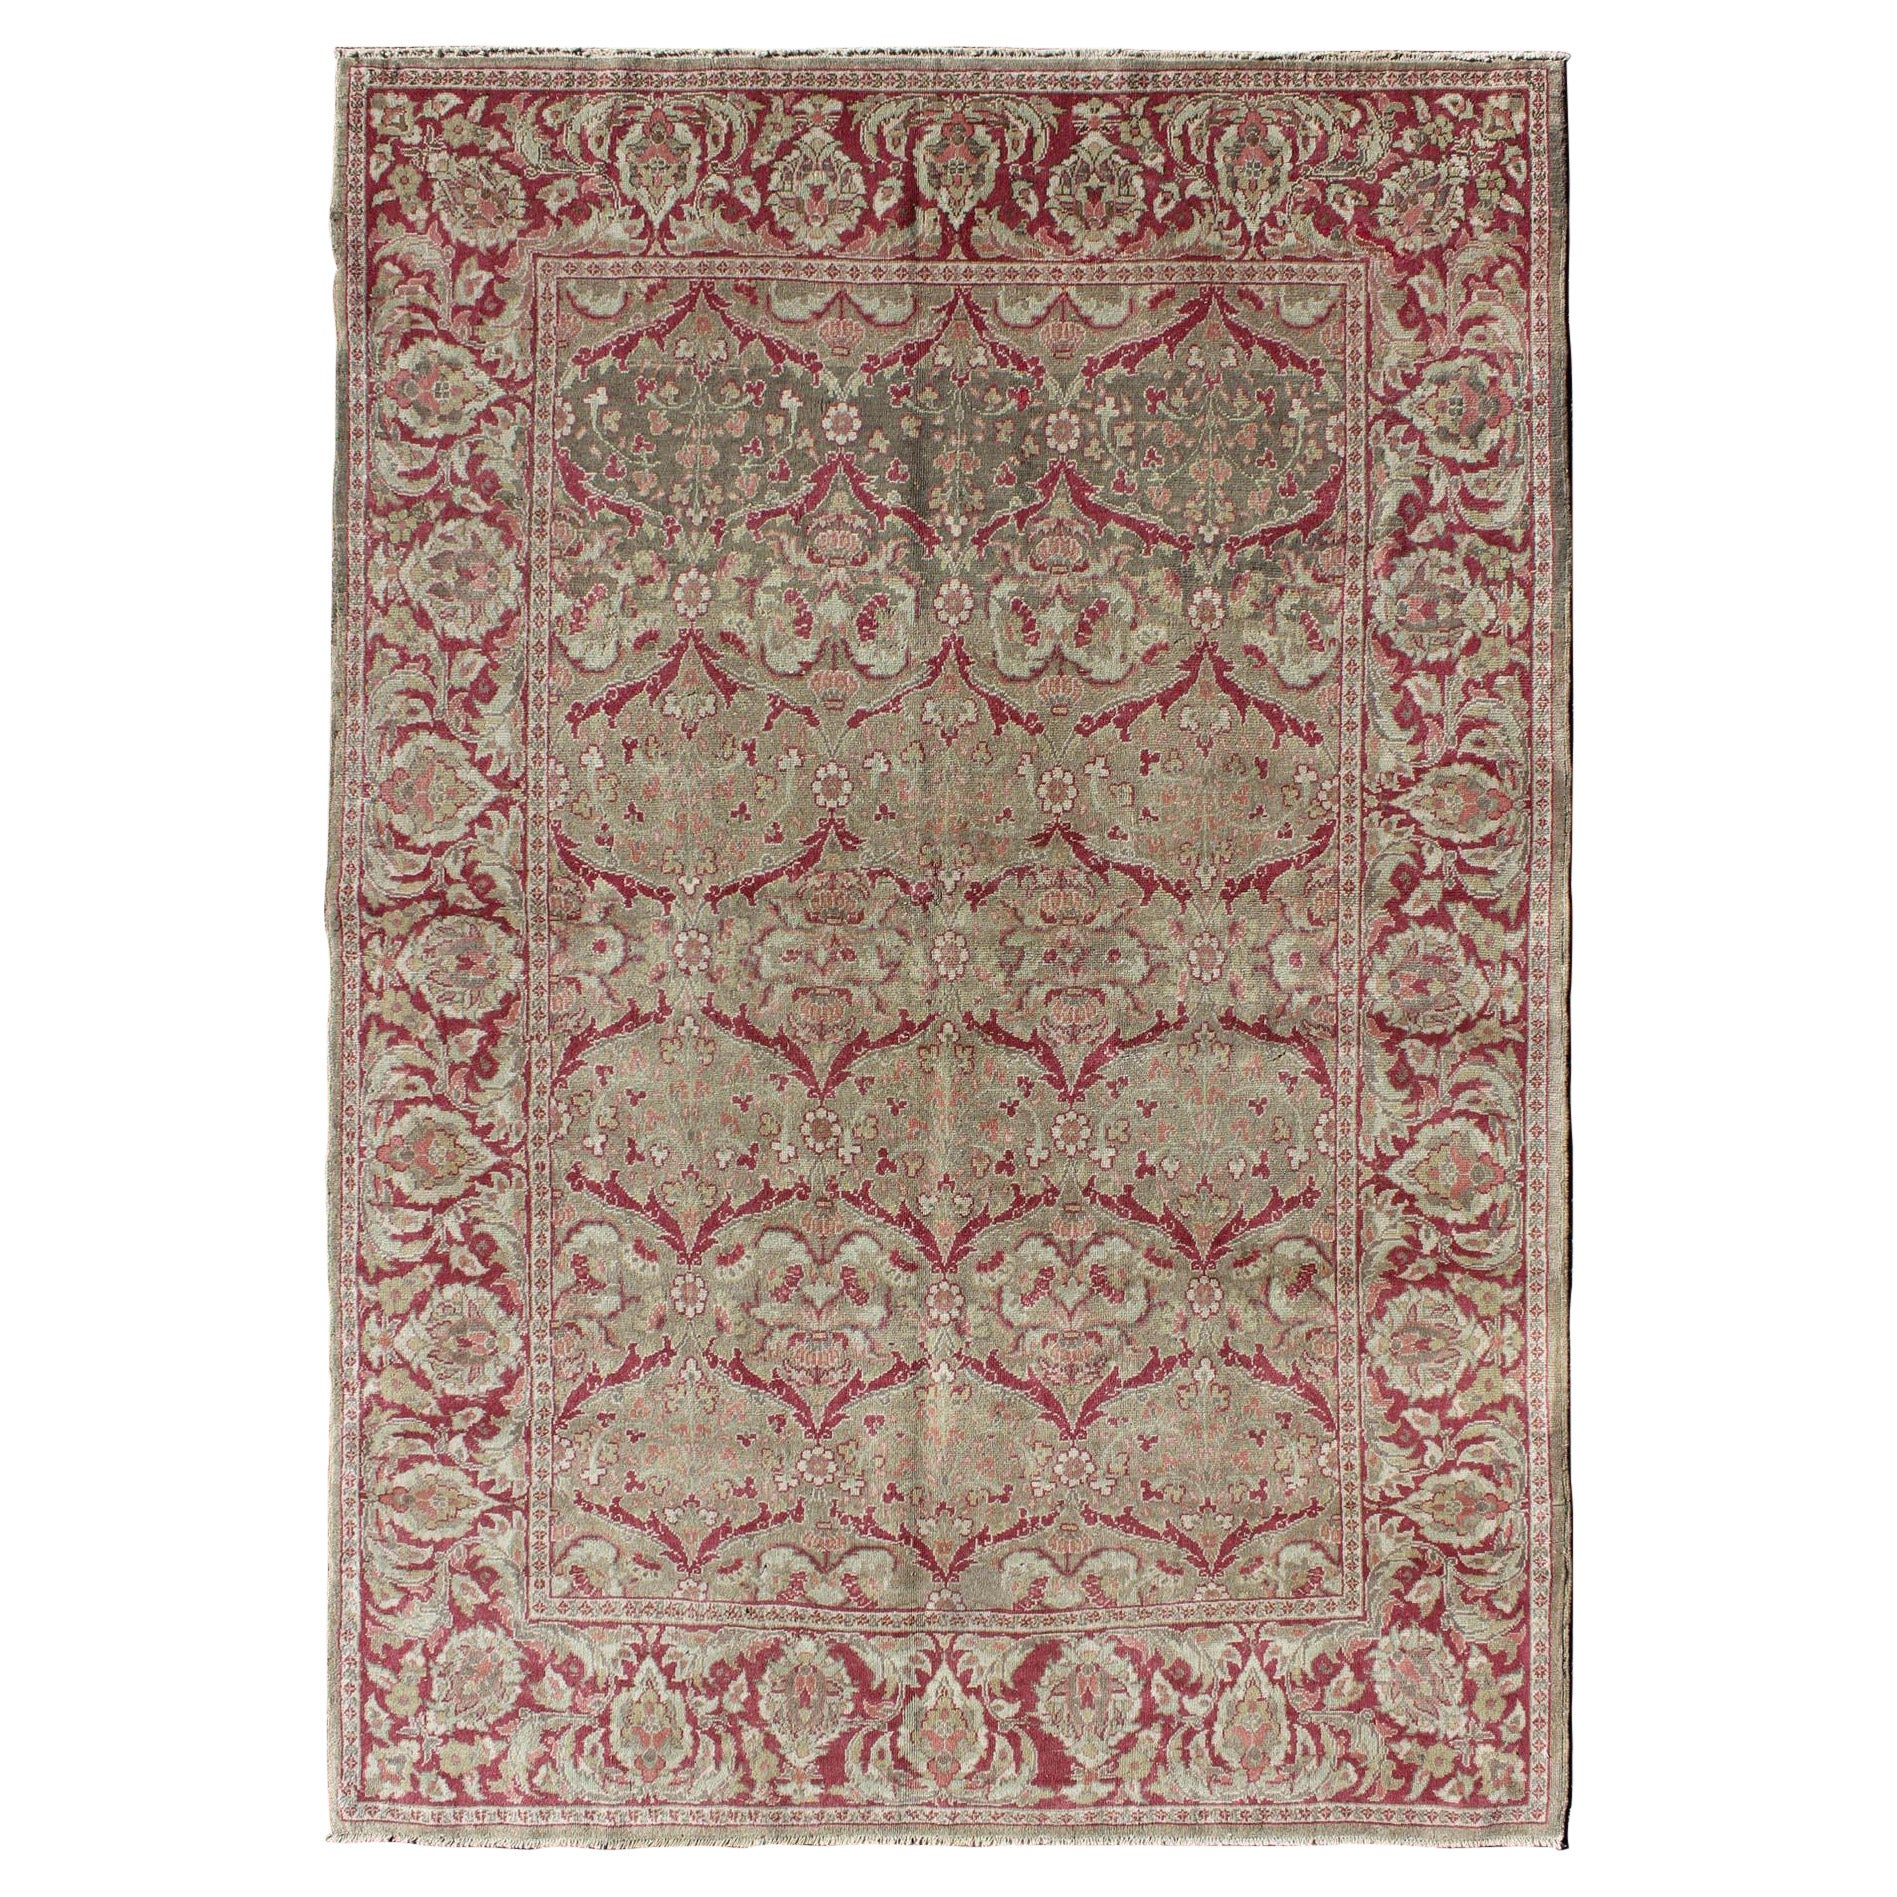 Vintage Turkish Sivas Rug in Burgundy Red, Cream, & Taupe with All-Over Design